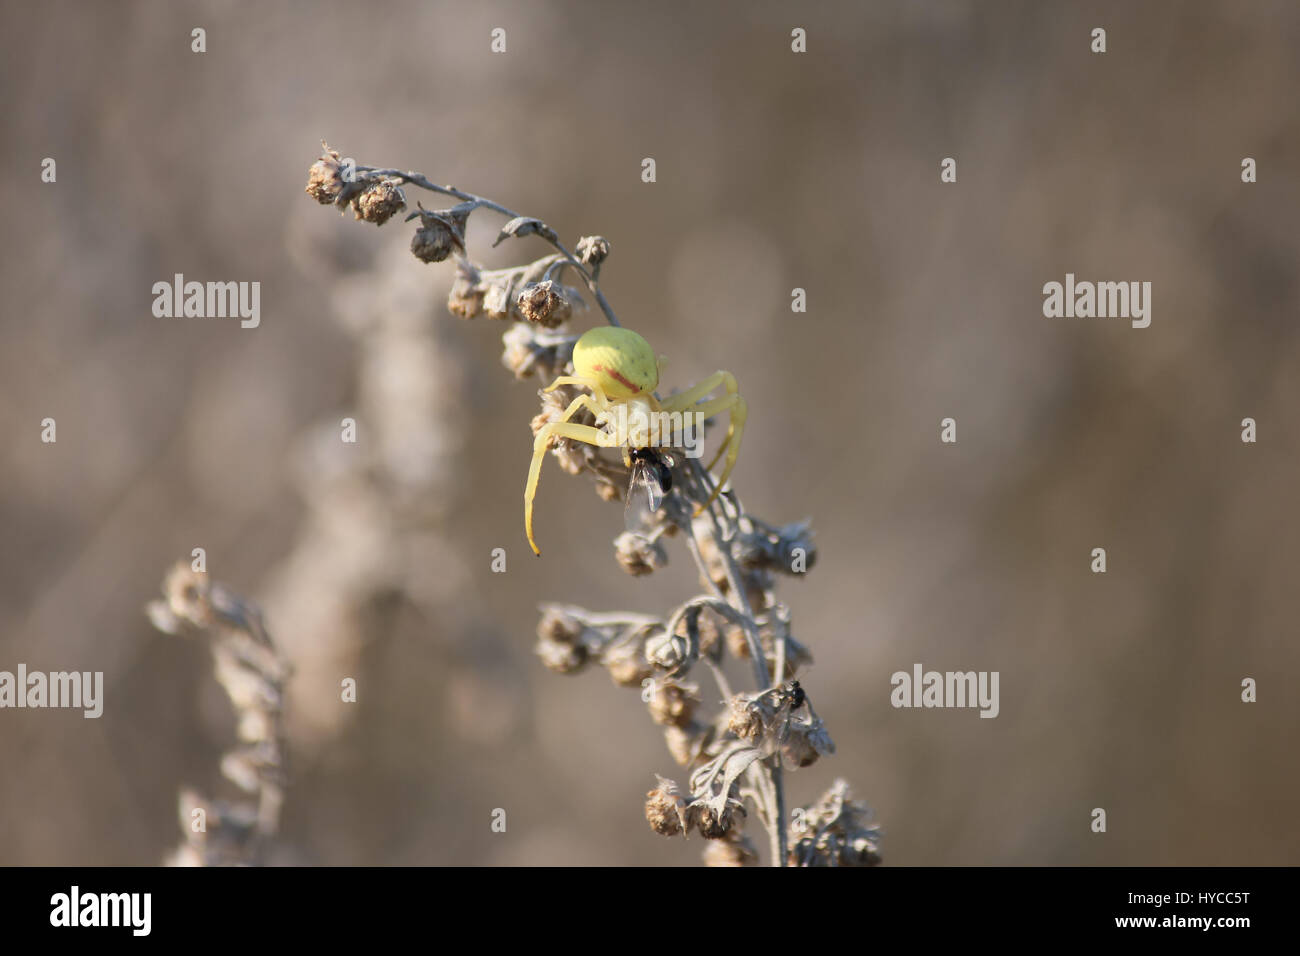 The spider eats an ant, Rostov-on-Don, Russia, September 14, 2011 Stock Photo